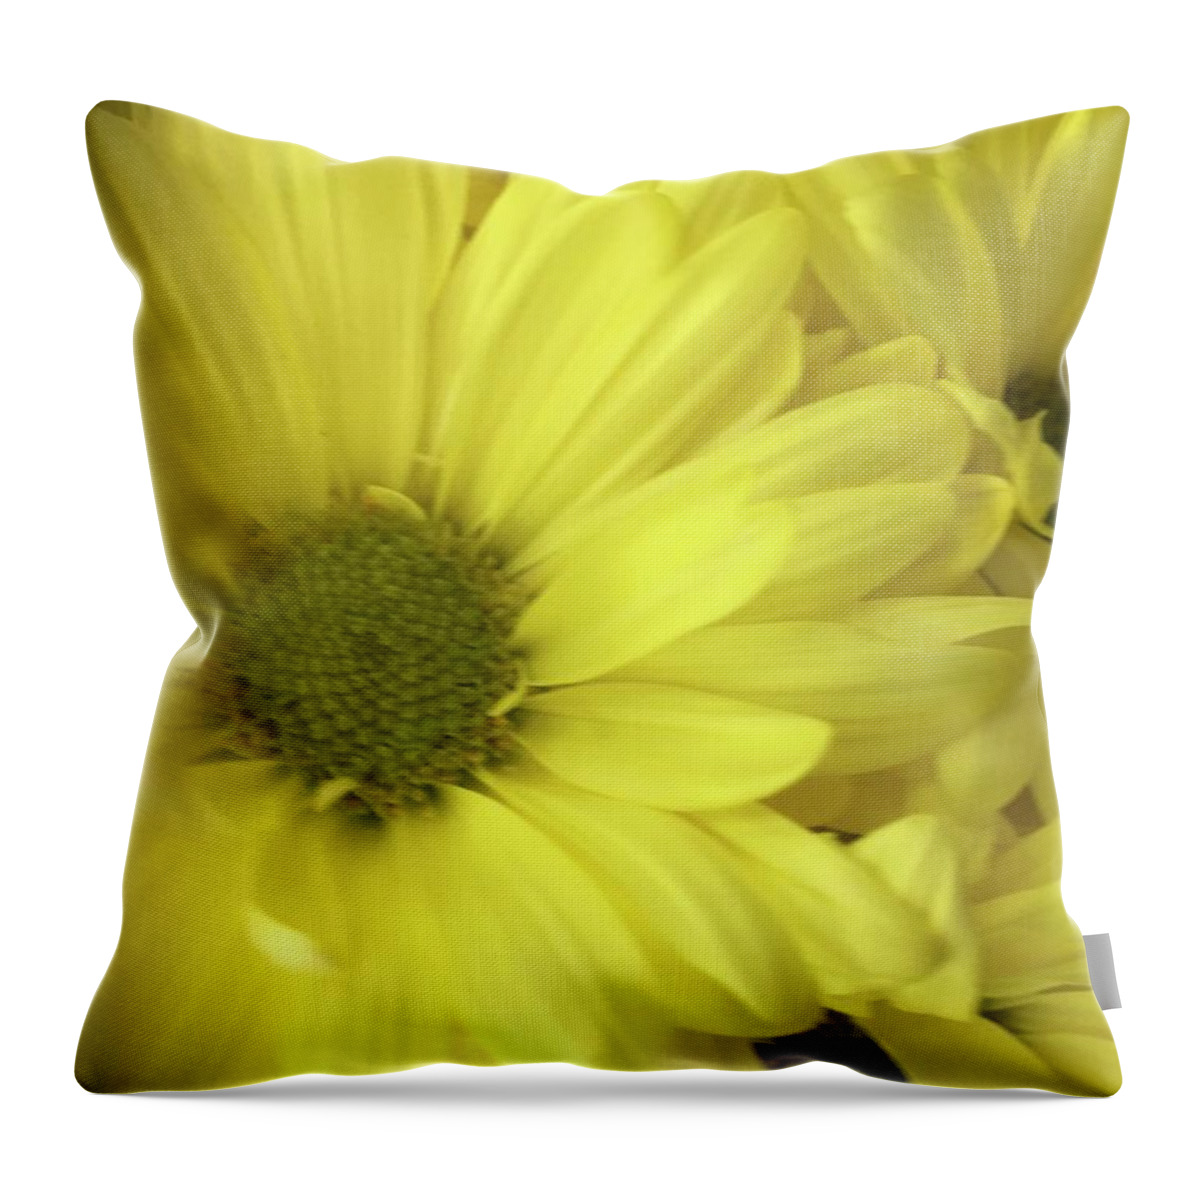 Daisy Throw Pillow featuring the photograph Yellow Daisies by Marian Lonzetta